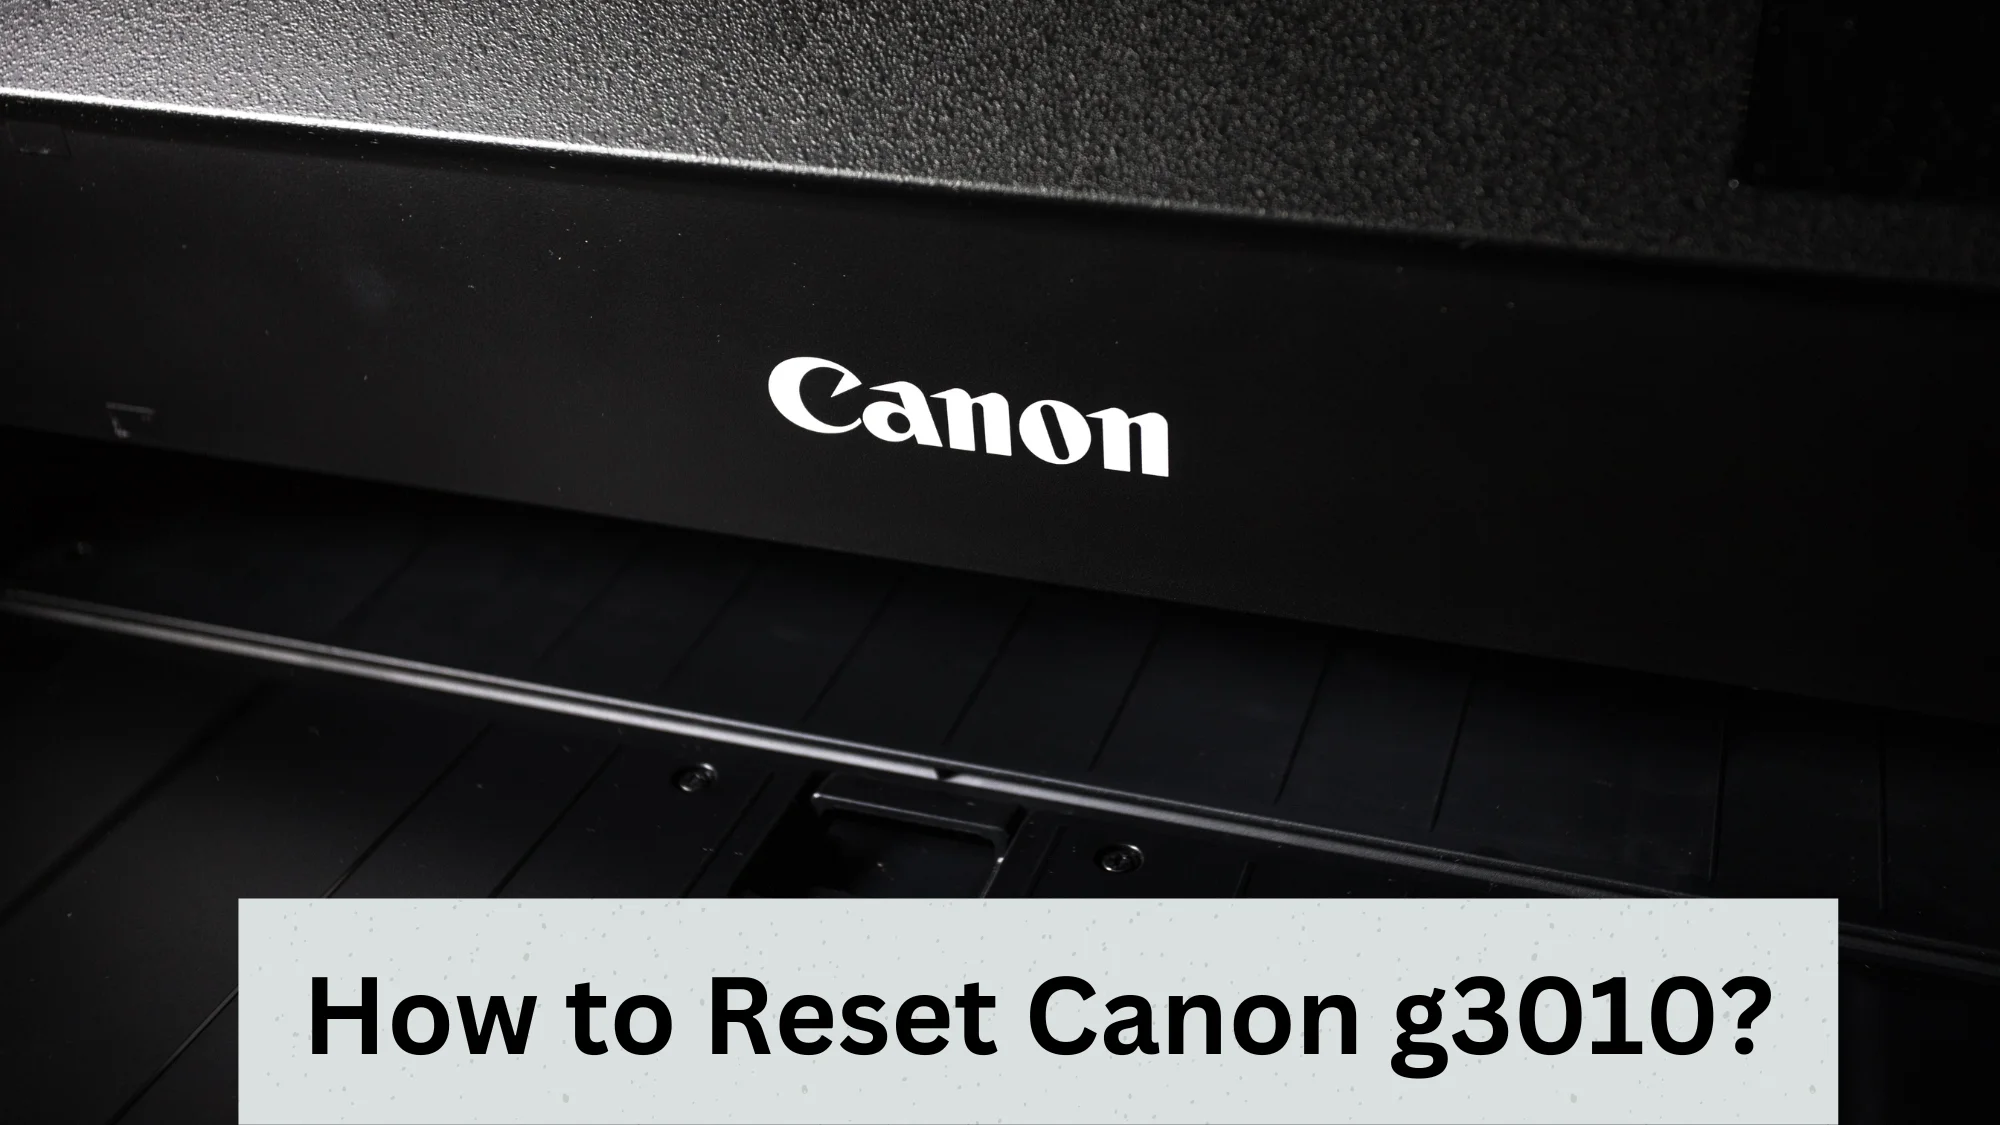 How to Reset Canon g3010